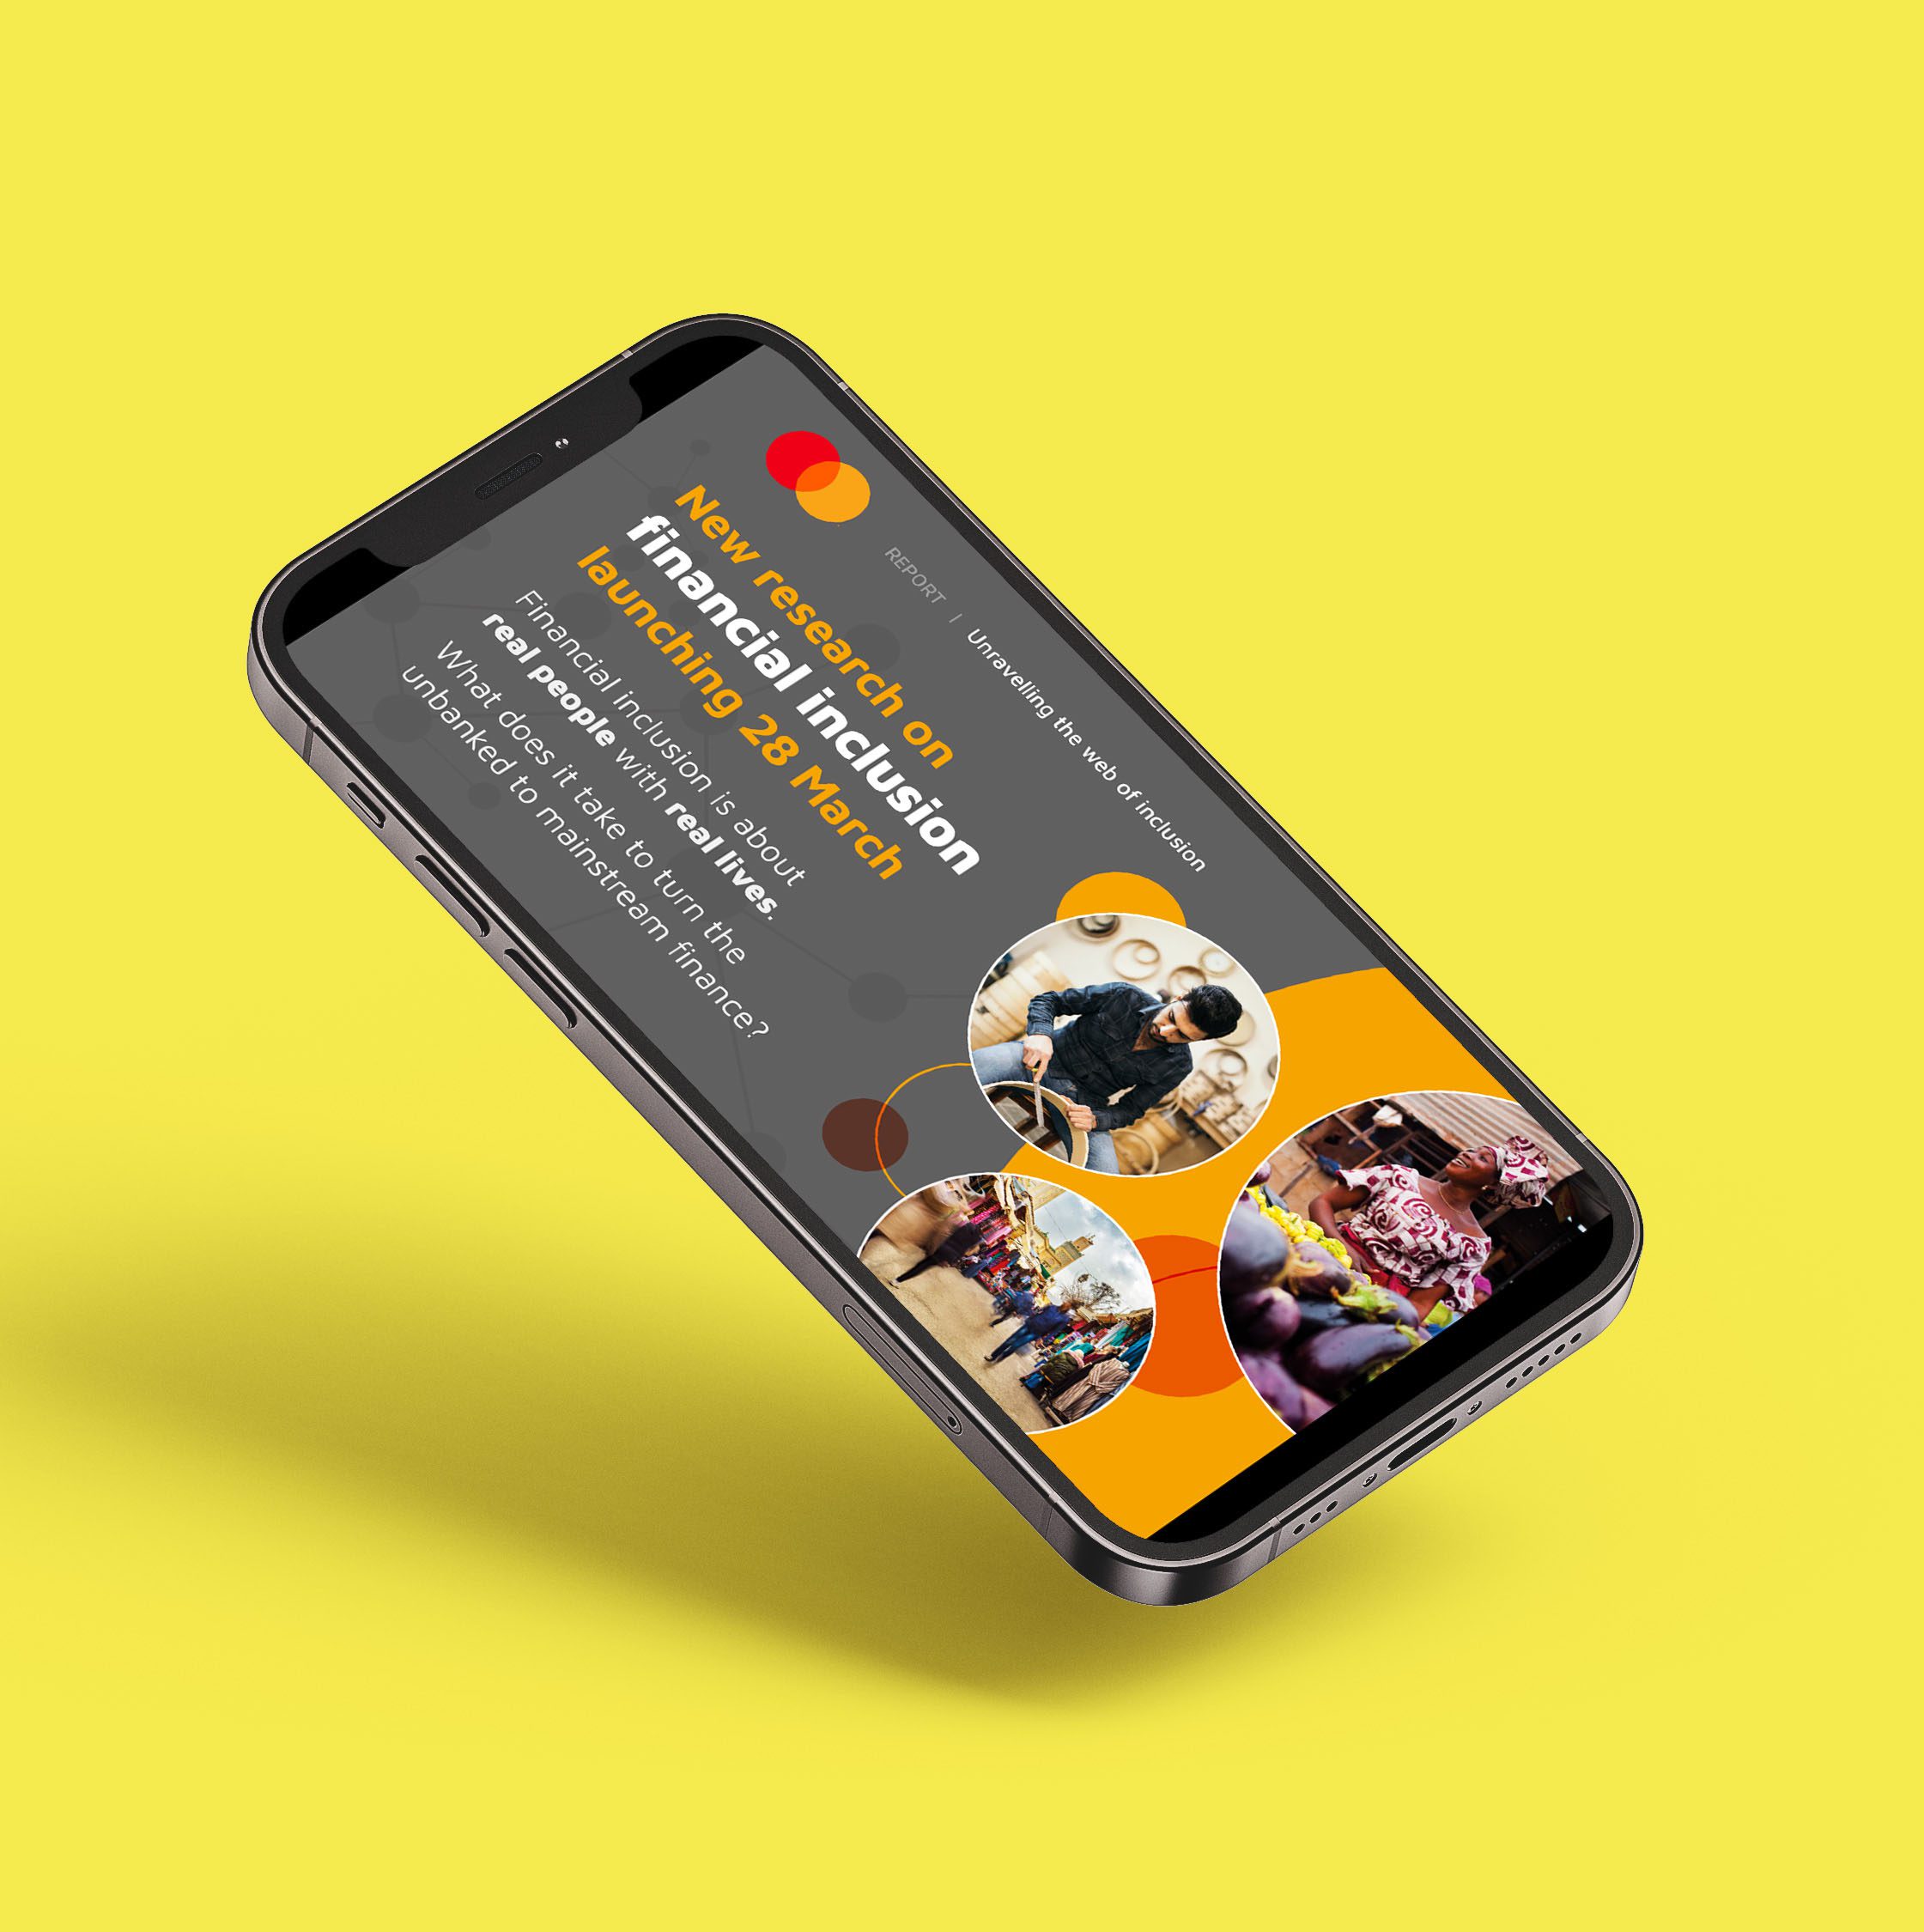 A professional social cards mockup design shown in a phone against a yellow background.